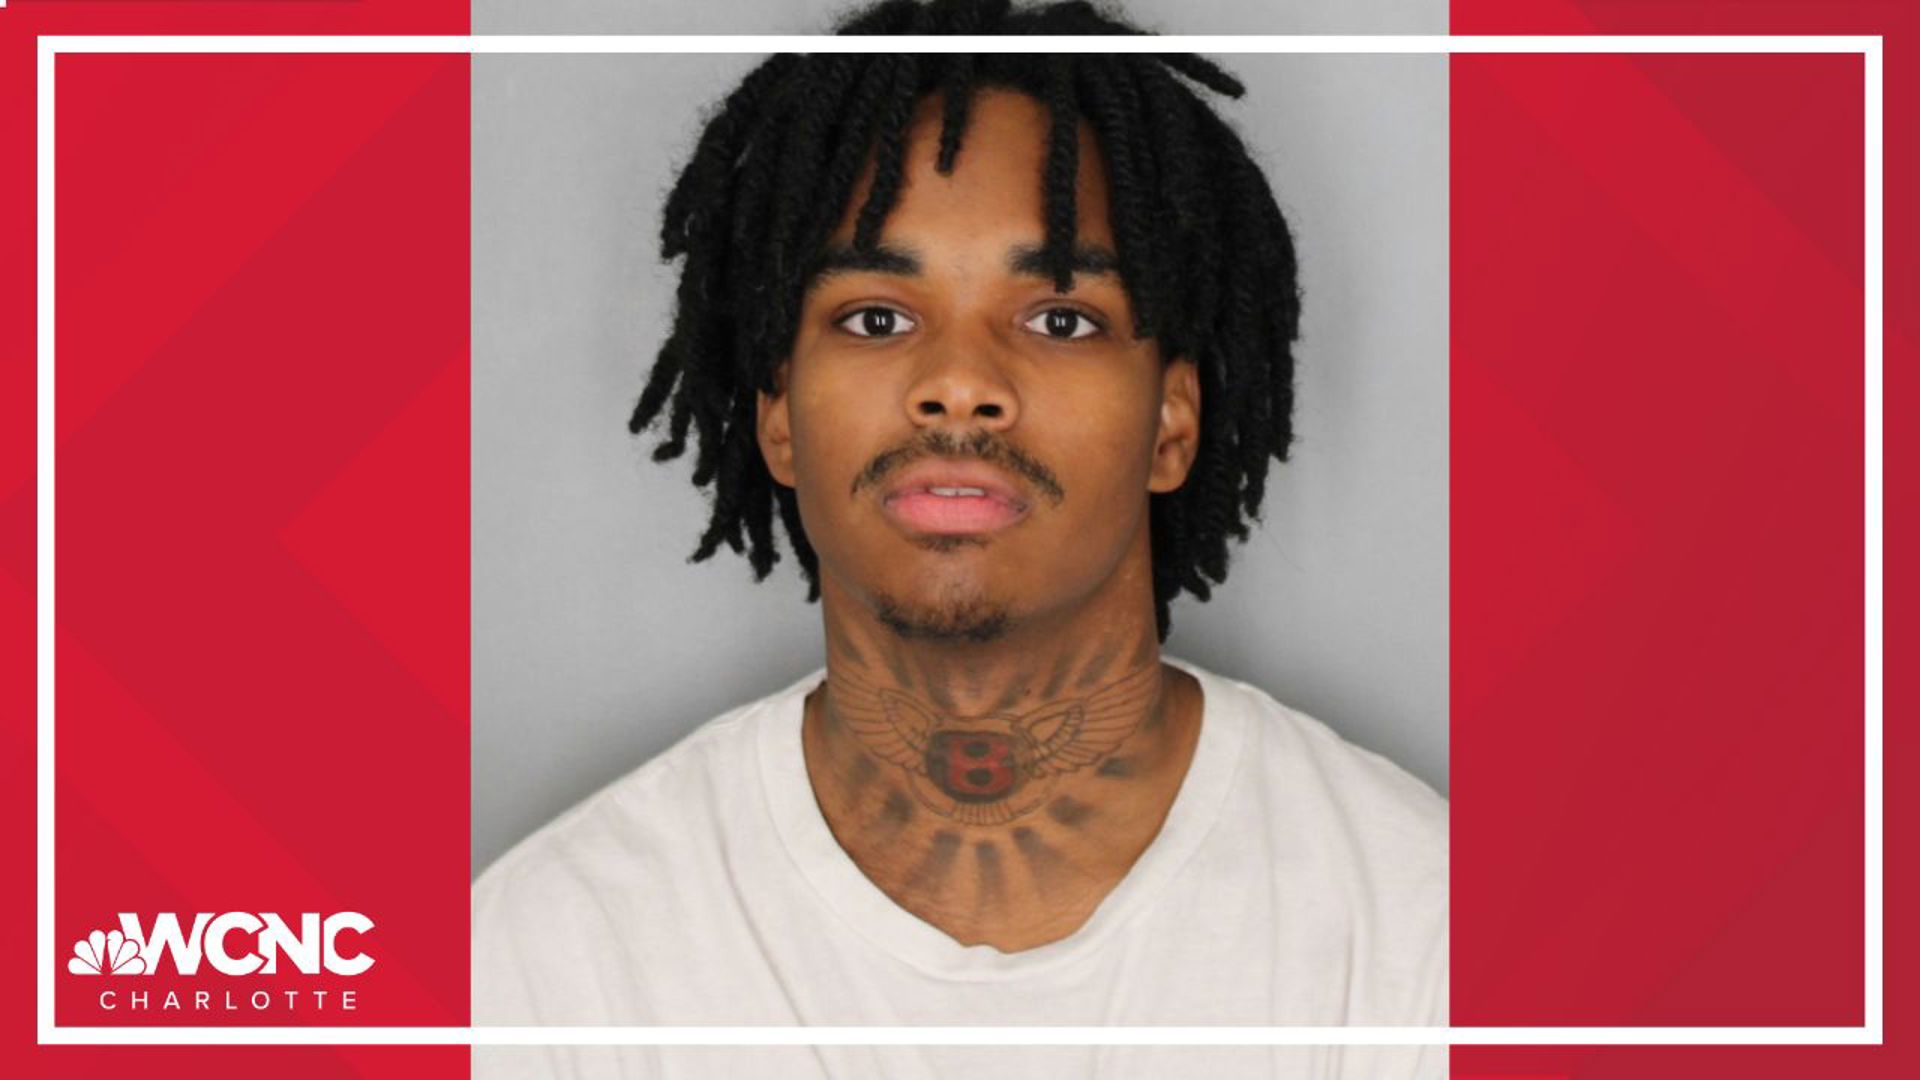 A fourth person was arrested in connection with a deadly shooting at a Rock Hill block party earlier this month, police said.